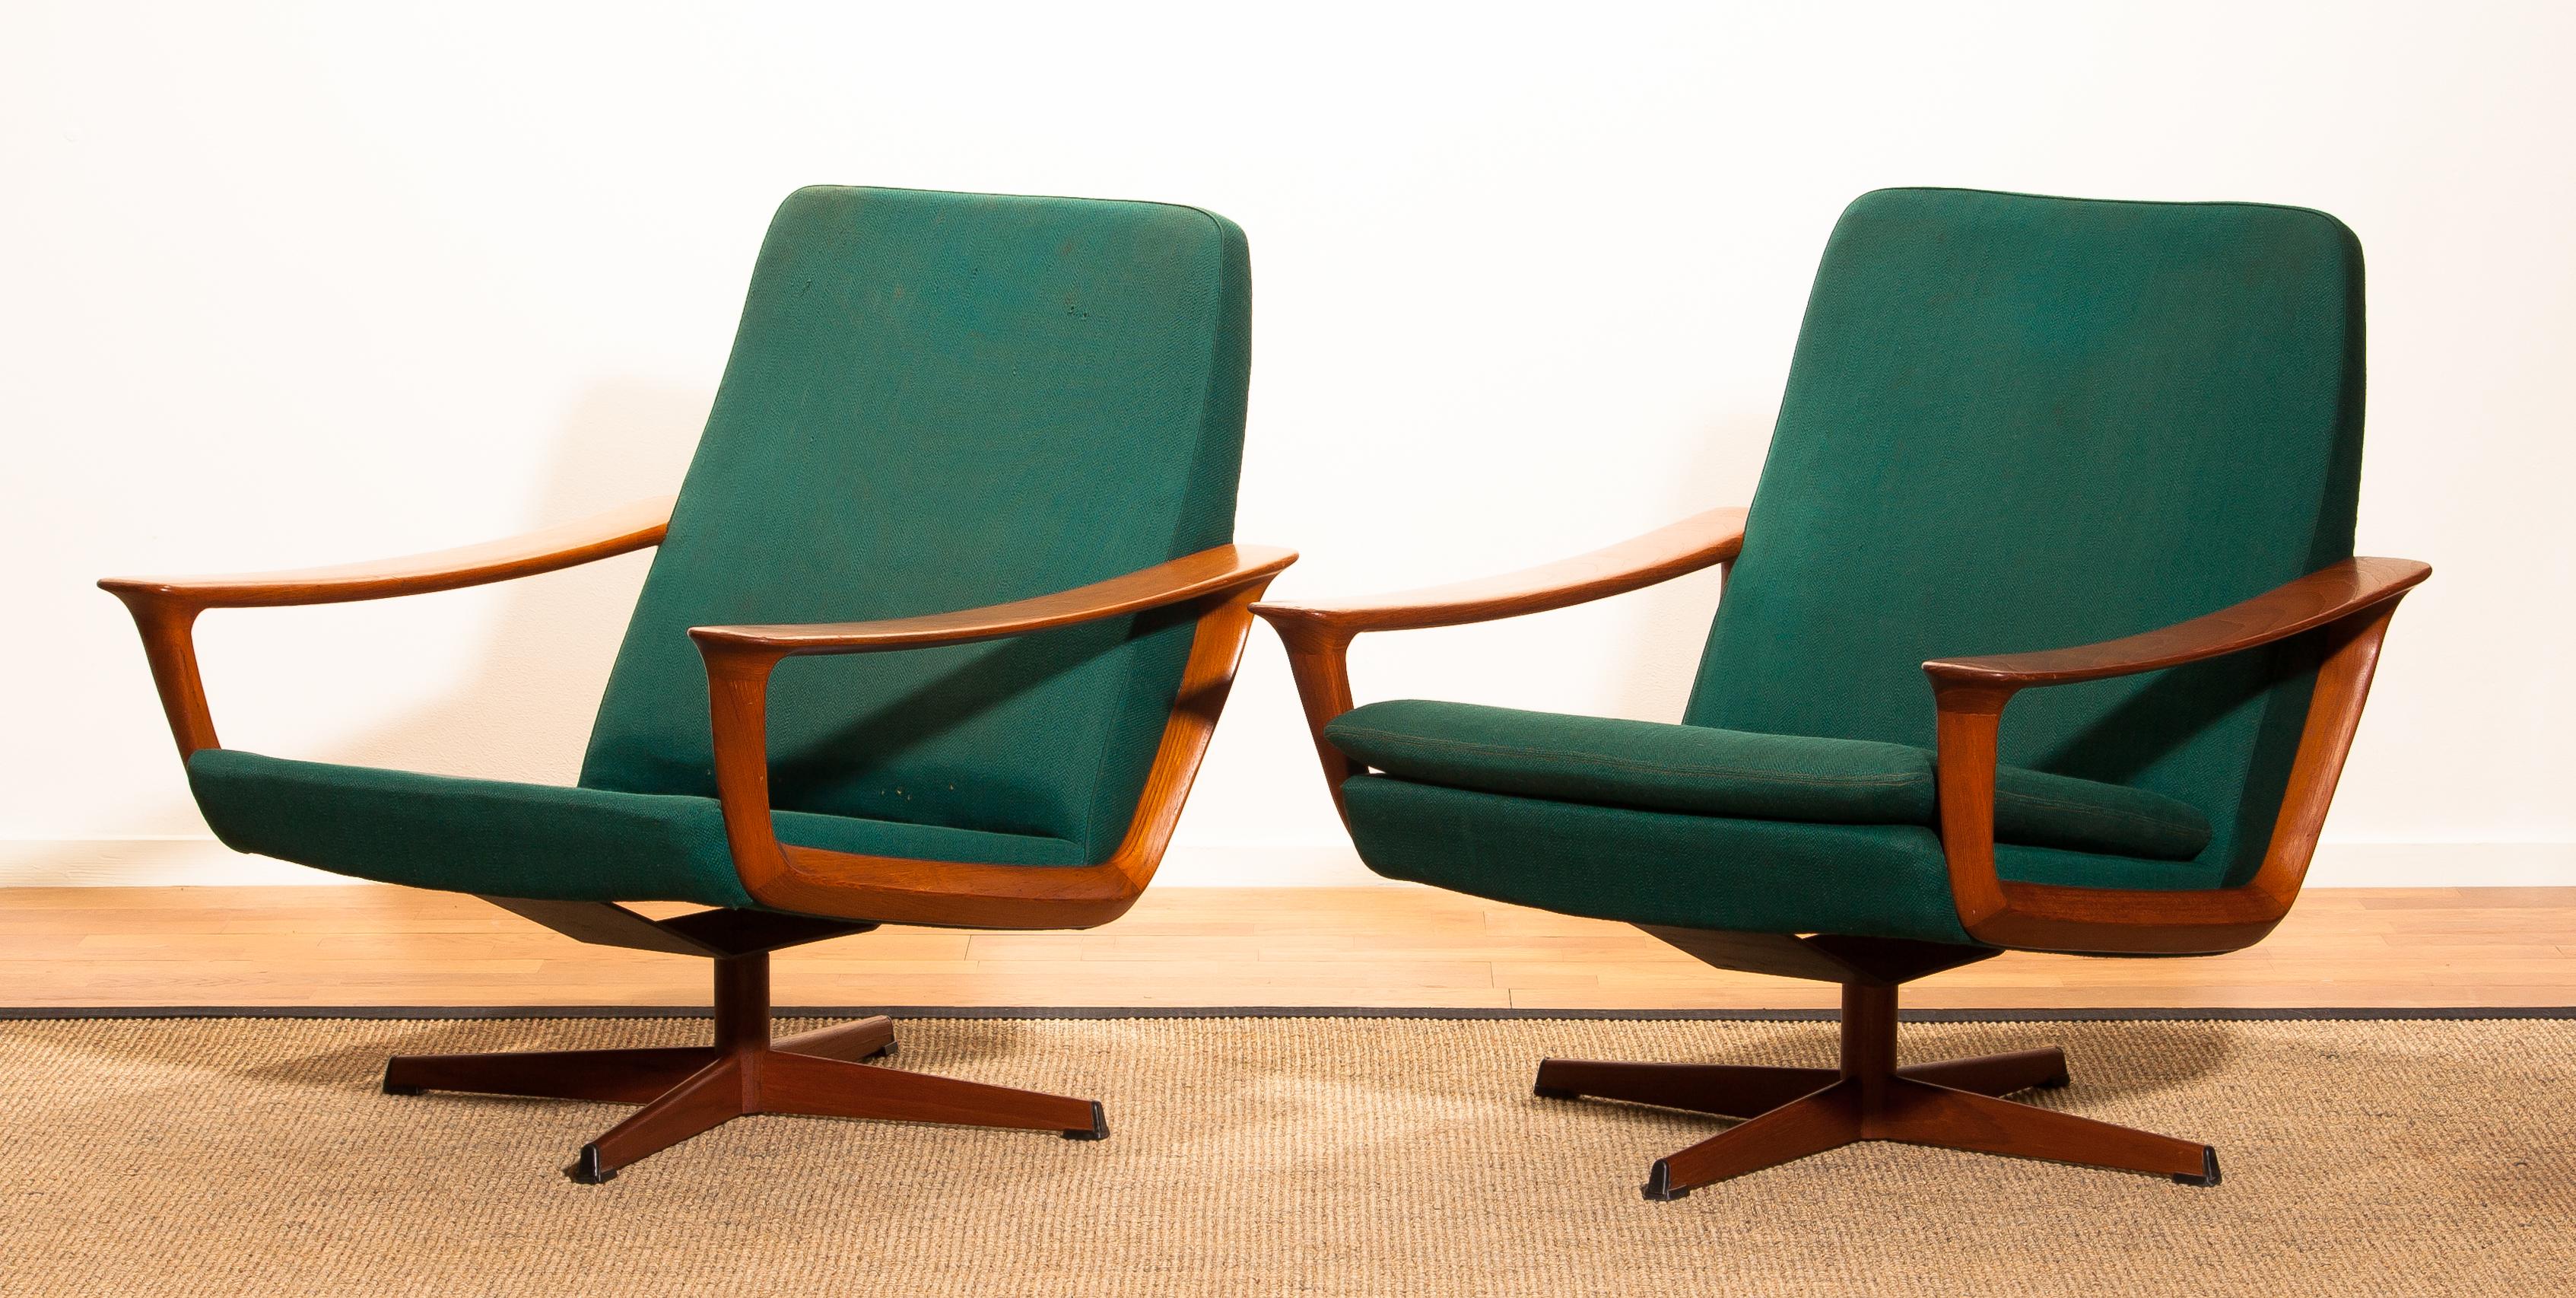 Metal 1960s, Teak Set of Two Swivel Chairs by Johannes Andersson for Trensum Denmark